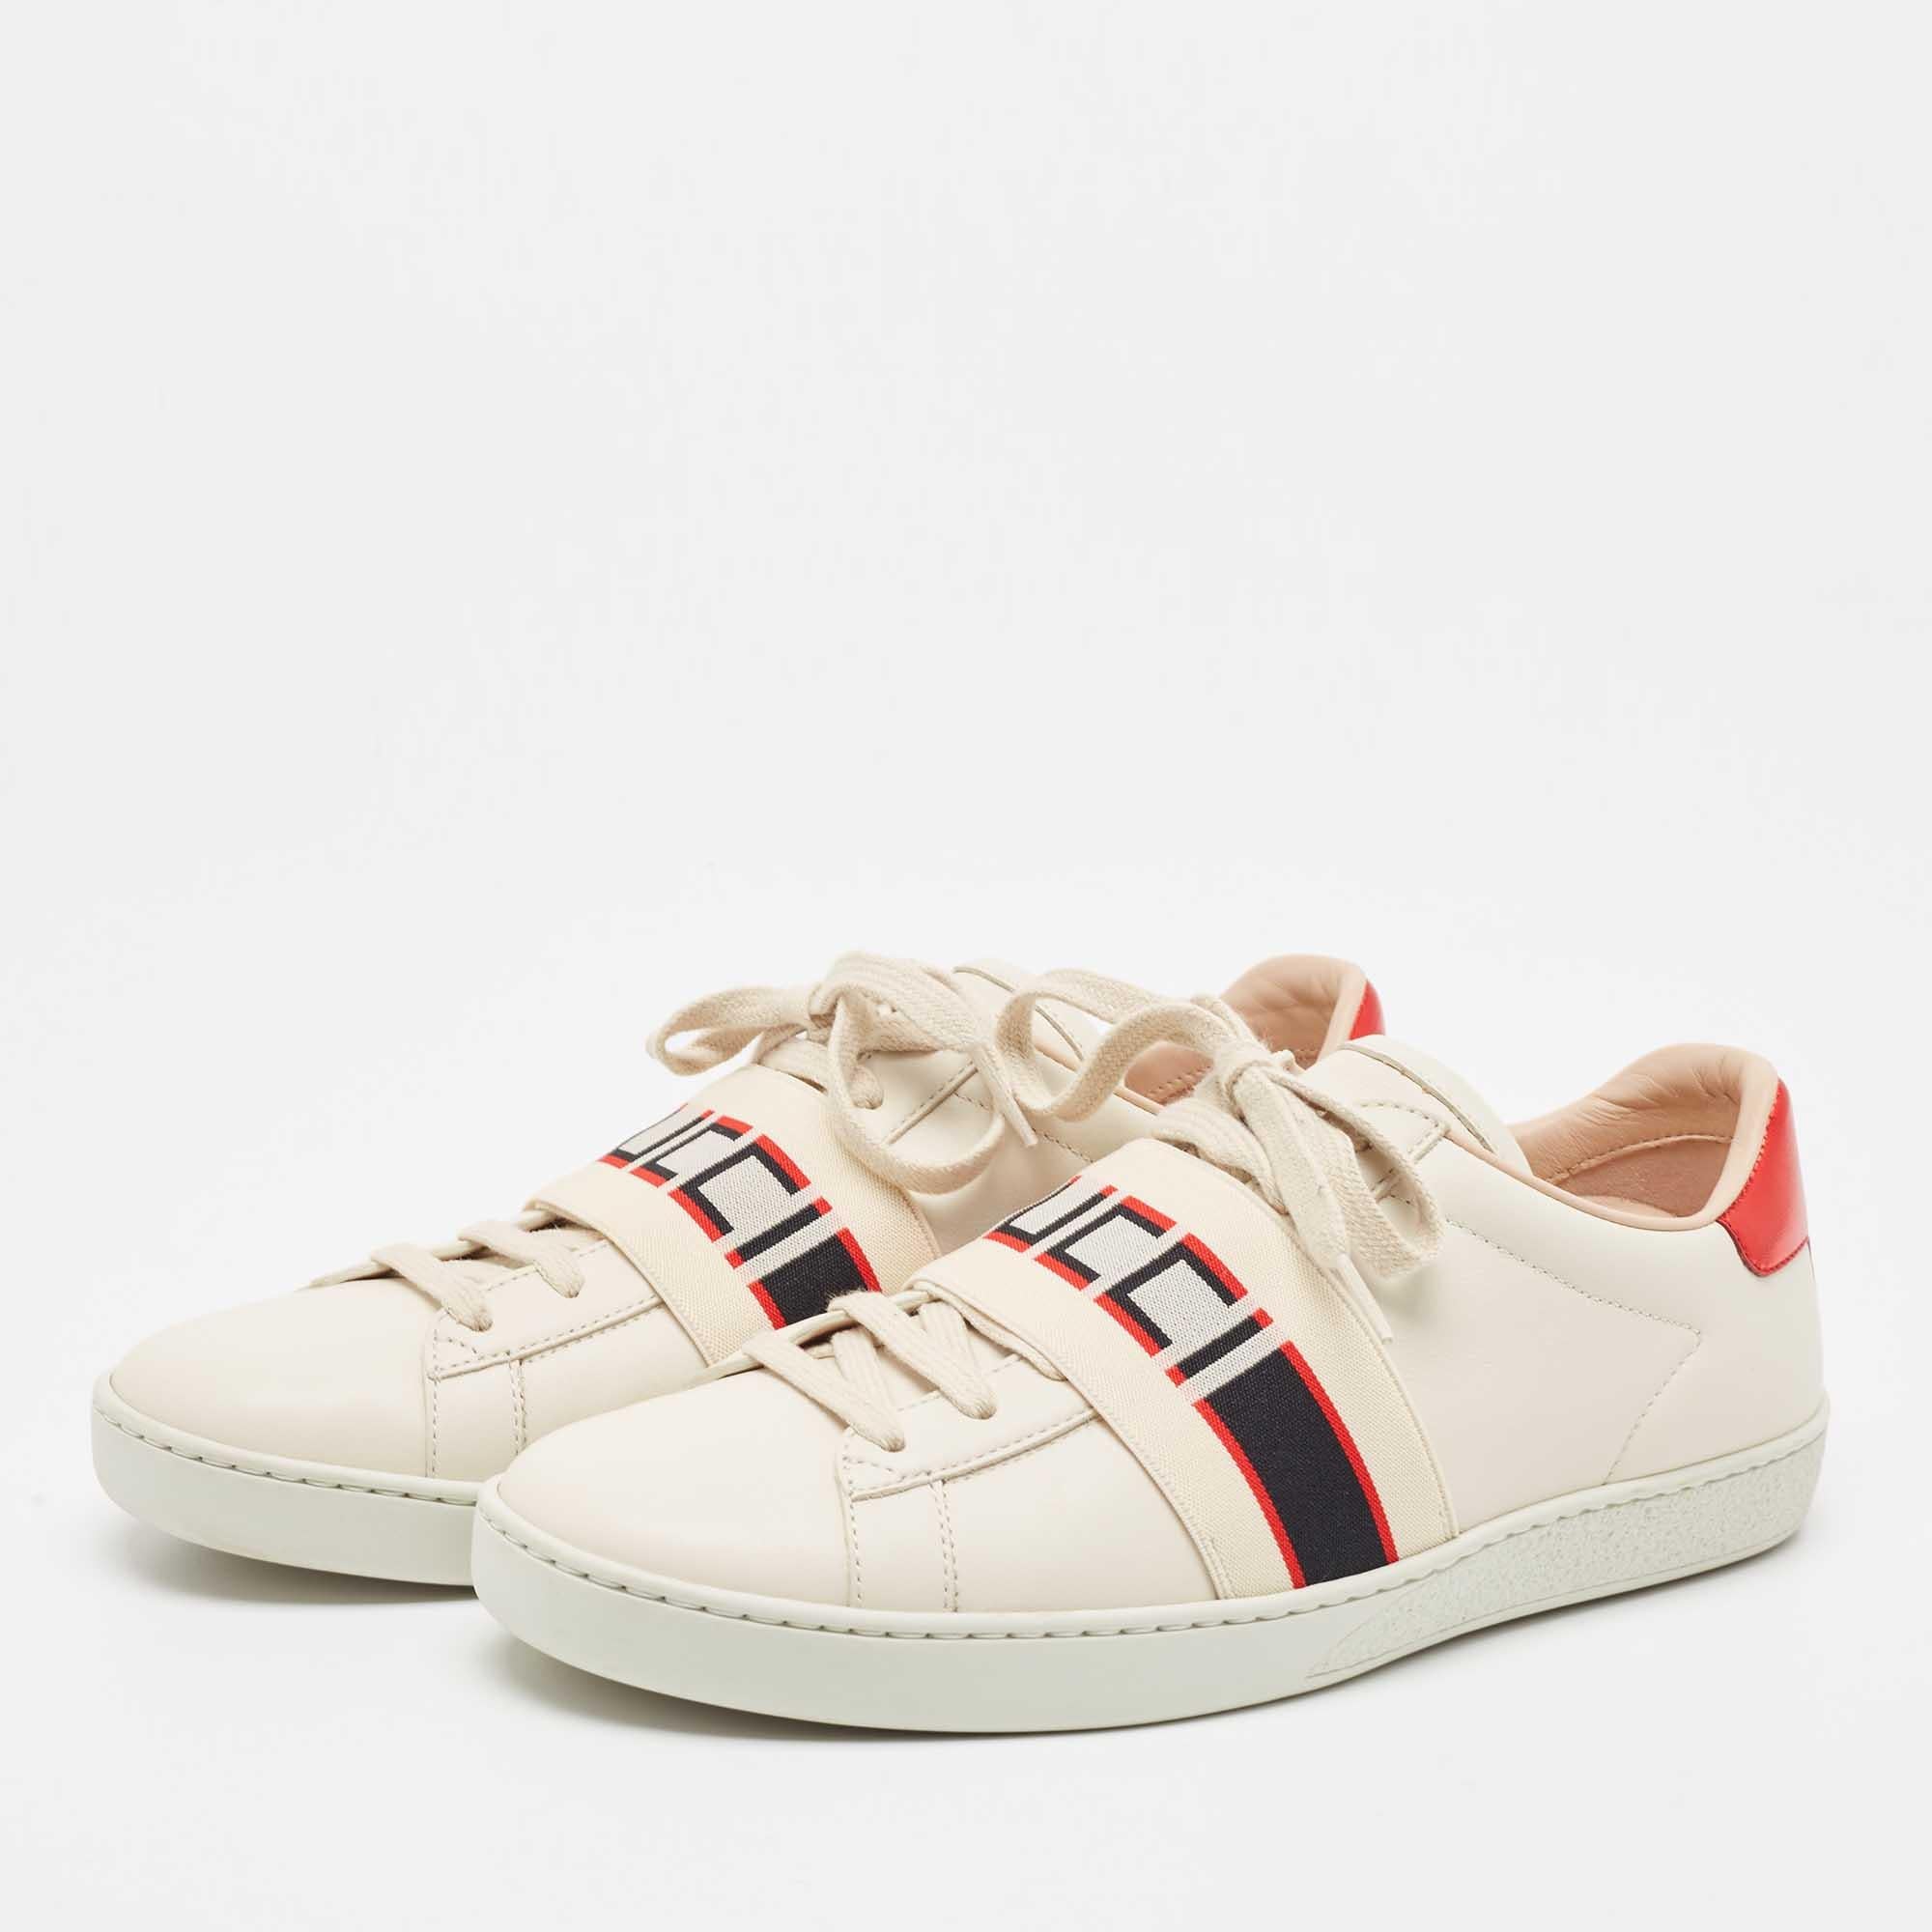 Gucci Cream Leather Logo Elastic Band Ace Sneakers Size 39 For Sale 2